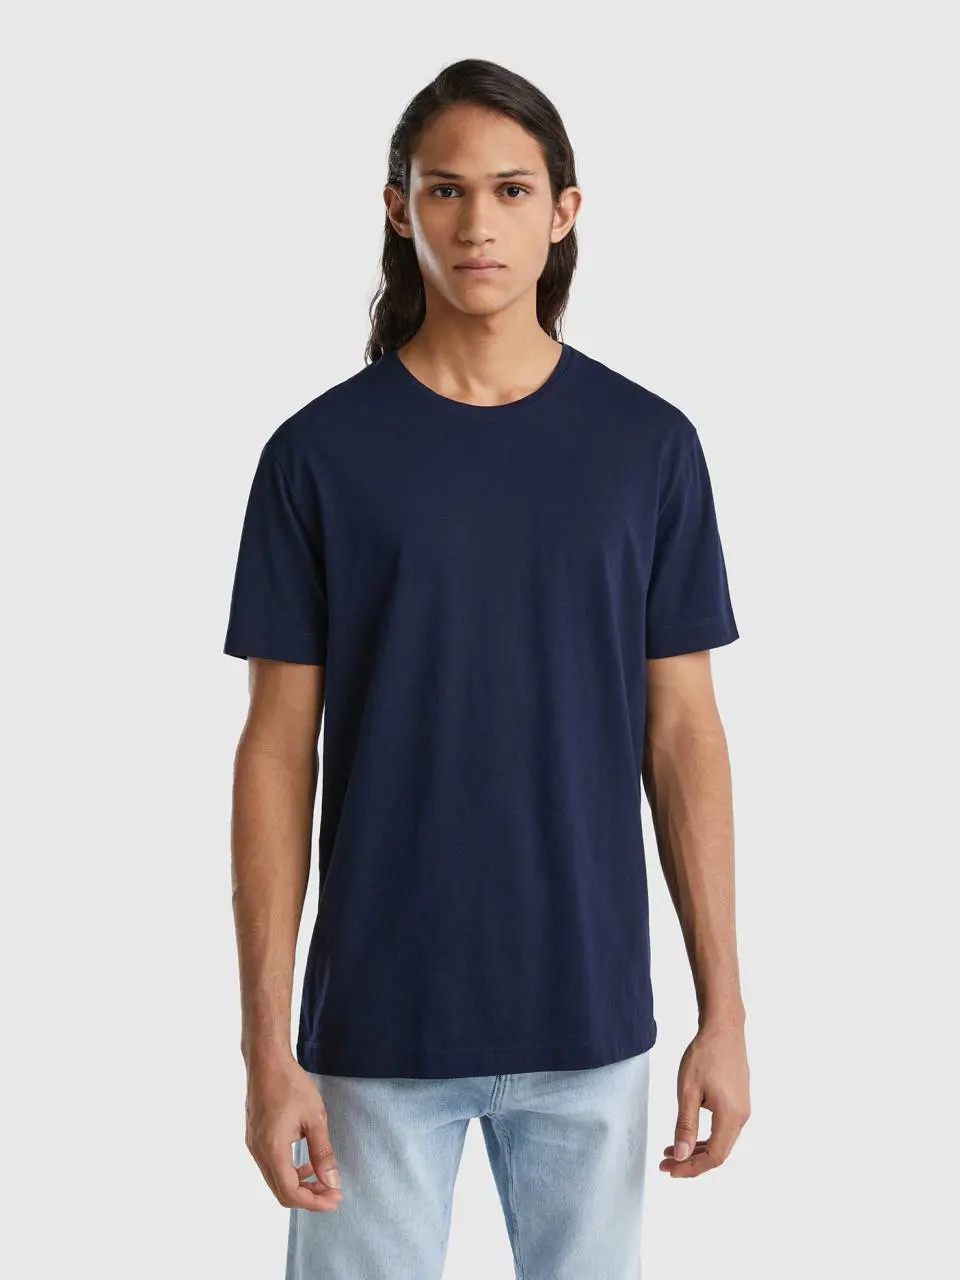 Benetton t-shirt in cotton and cashmere blend. 1